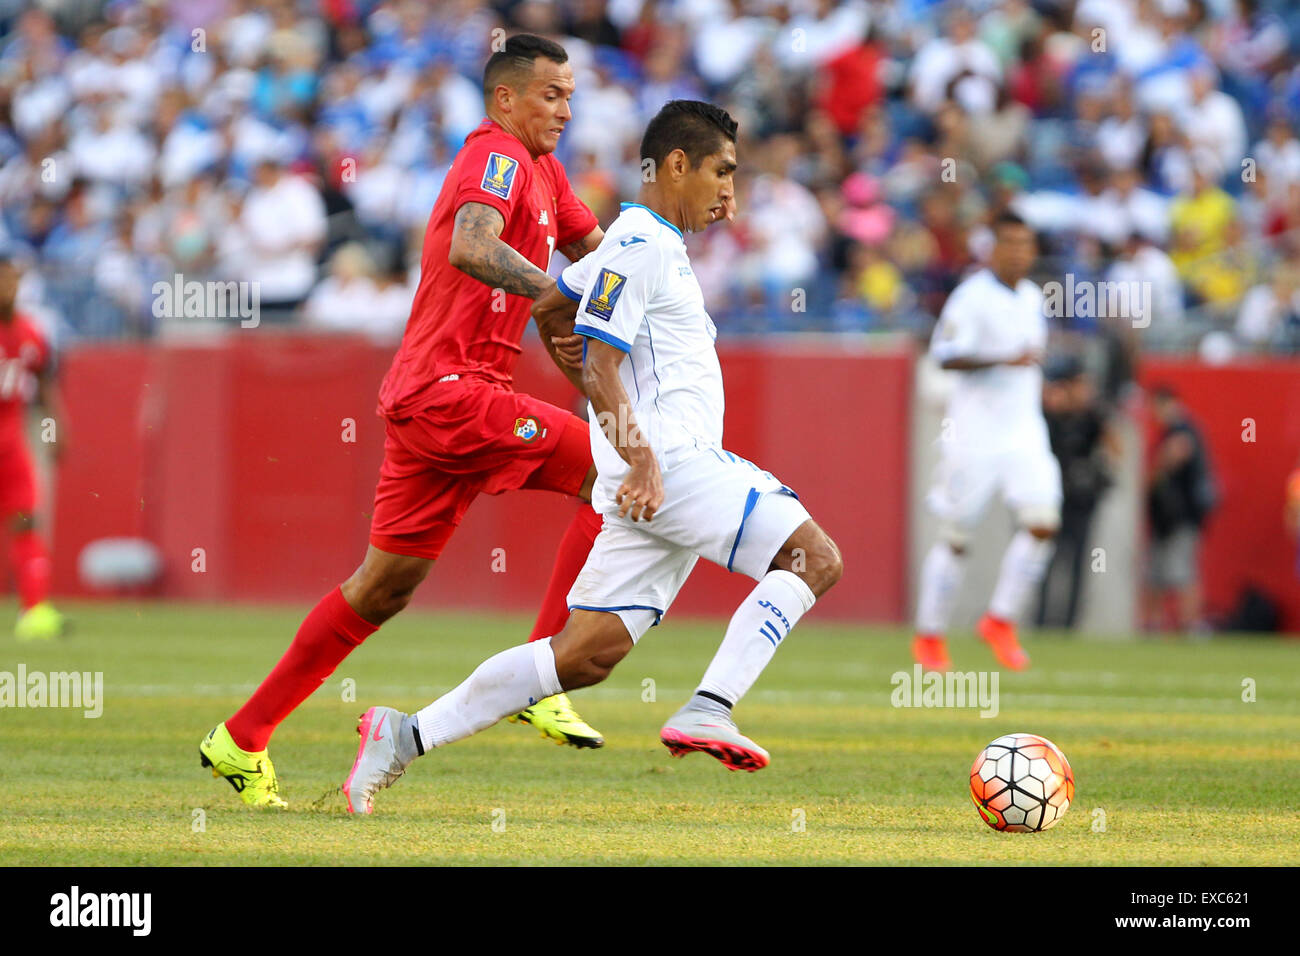 July 10, 2015; Foxborough, MA, USA; Panama forward Blas Perez (7) and Honduras midfielder Jorge Claros (20) in action during the CONCACAF Gold Cup match between Panama and Honduras at Gillette Stadium. The match ended in a 1-1 tie. Anthony Nesmith/Cal Sport Media Stock Photo